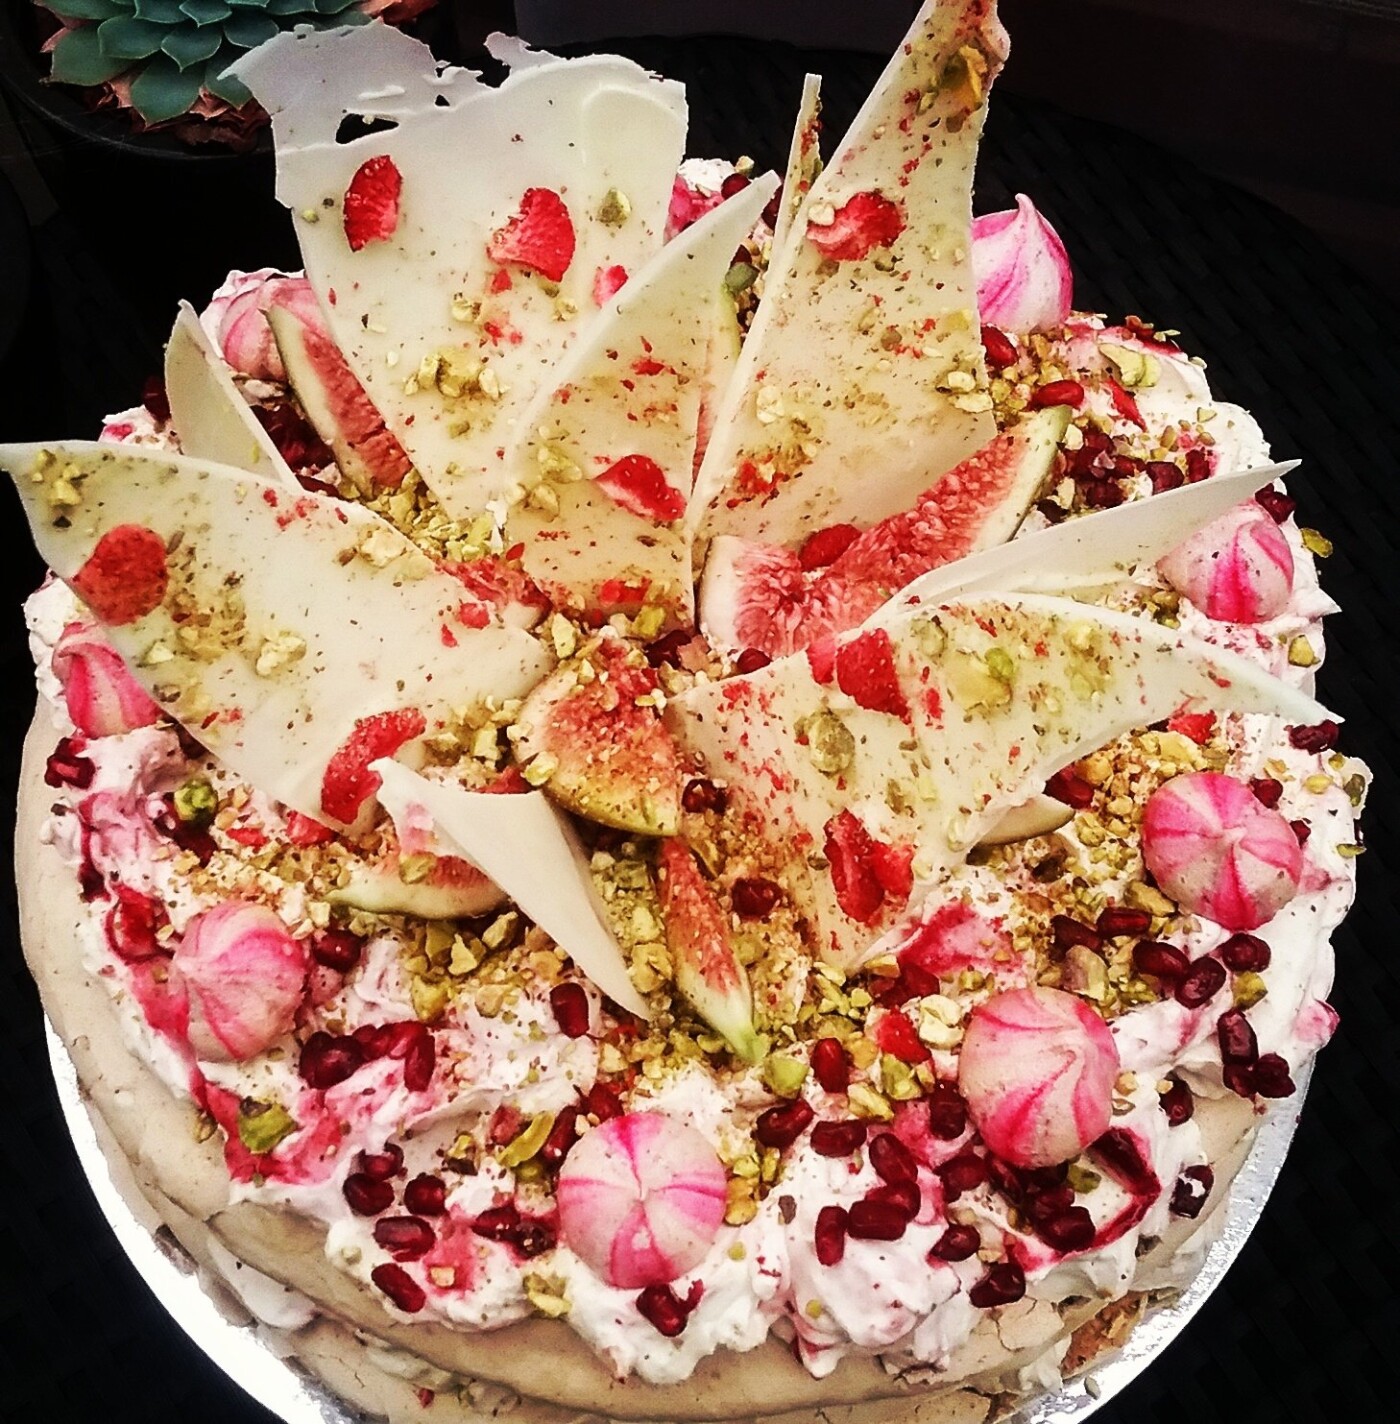 My Persian Inspired Pavlova....This is one of my favourite desserts!! I created this for a client of mine, she asked for a pavlova but wanted something different. So i came up with this beautiful recipe of rosewater, pistachios, cream, figs, fresh raspberries, freeze dried raspberries, pomegranate and white chocolate shards. Its such a pretty Pavlova I just love it!